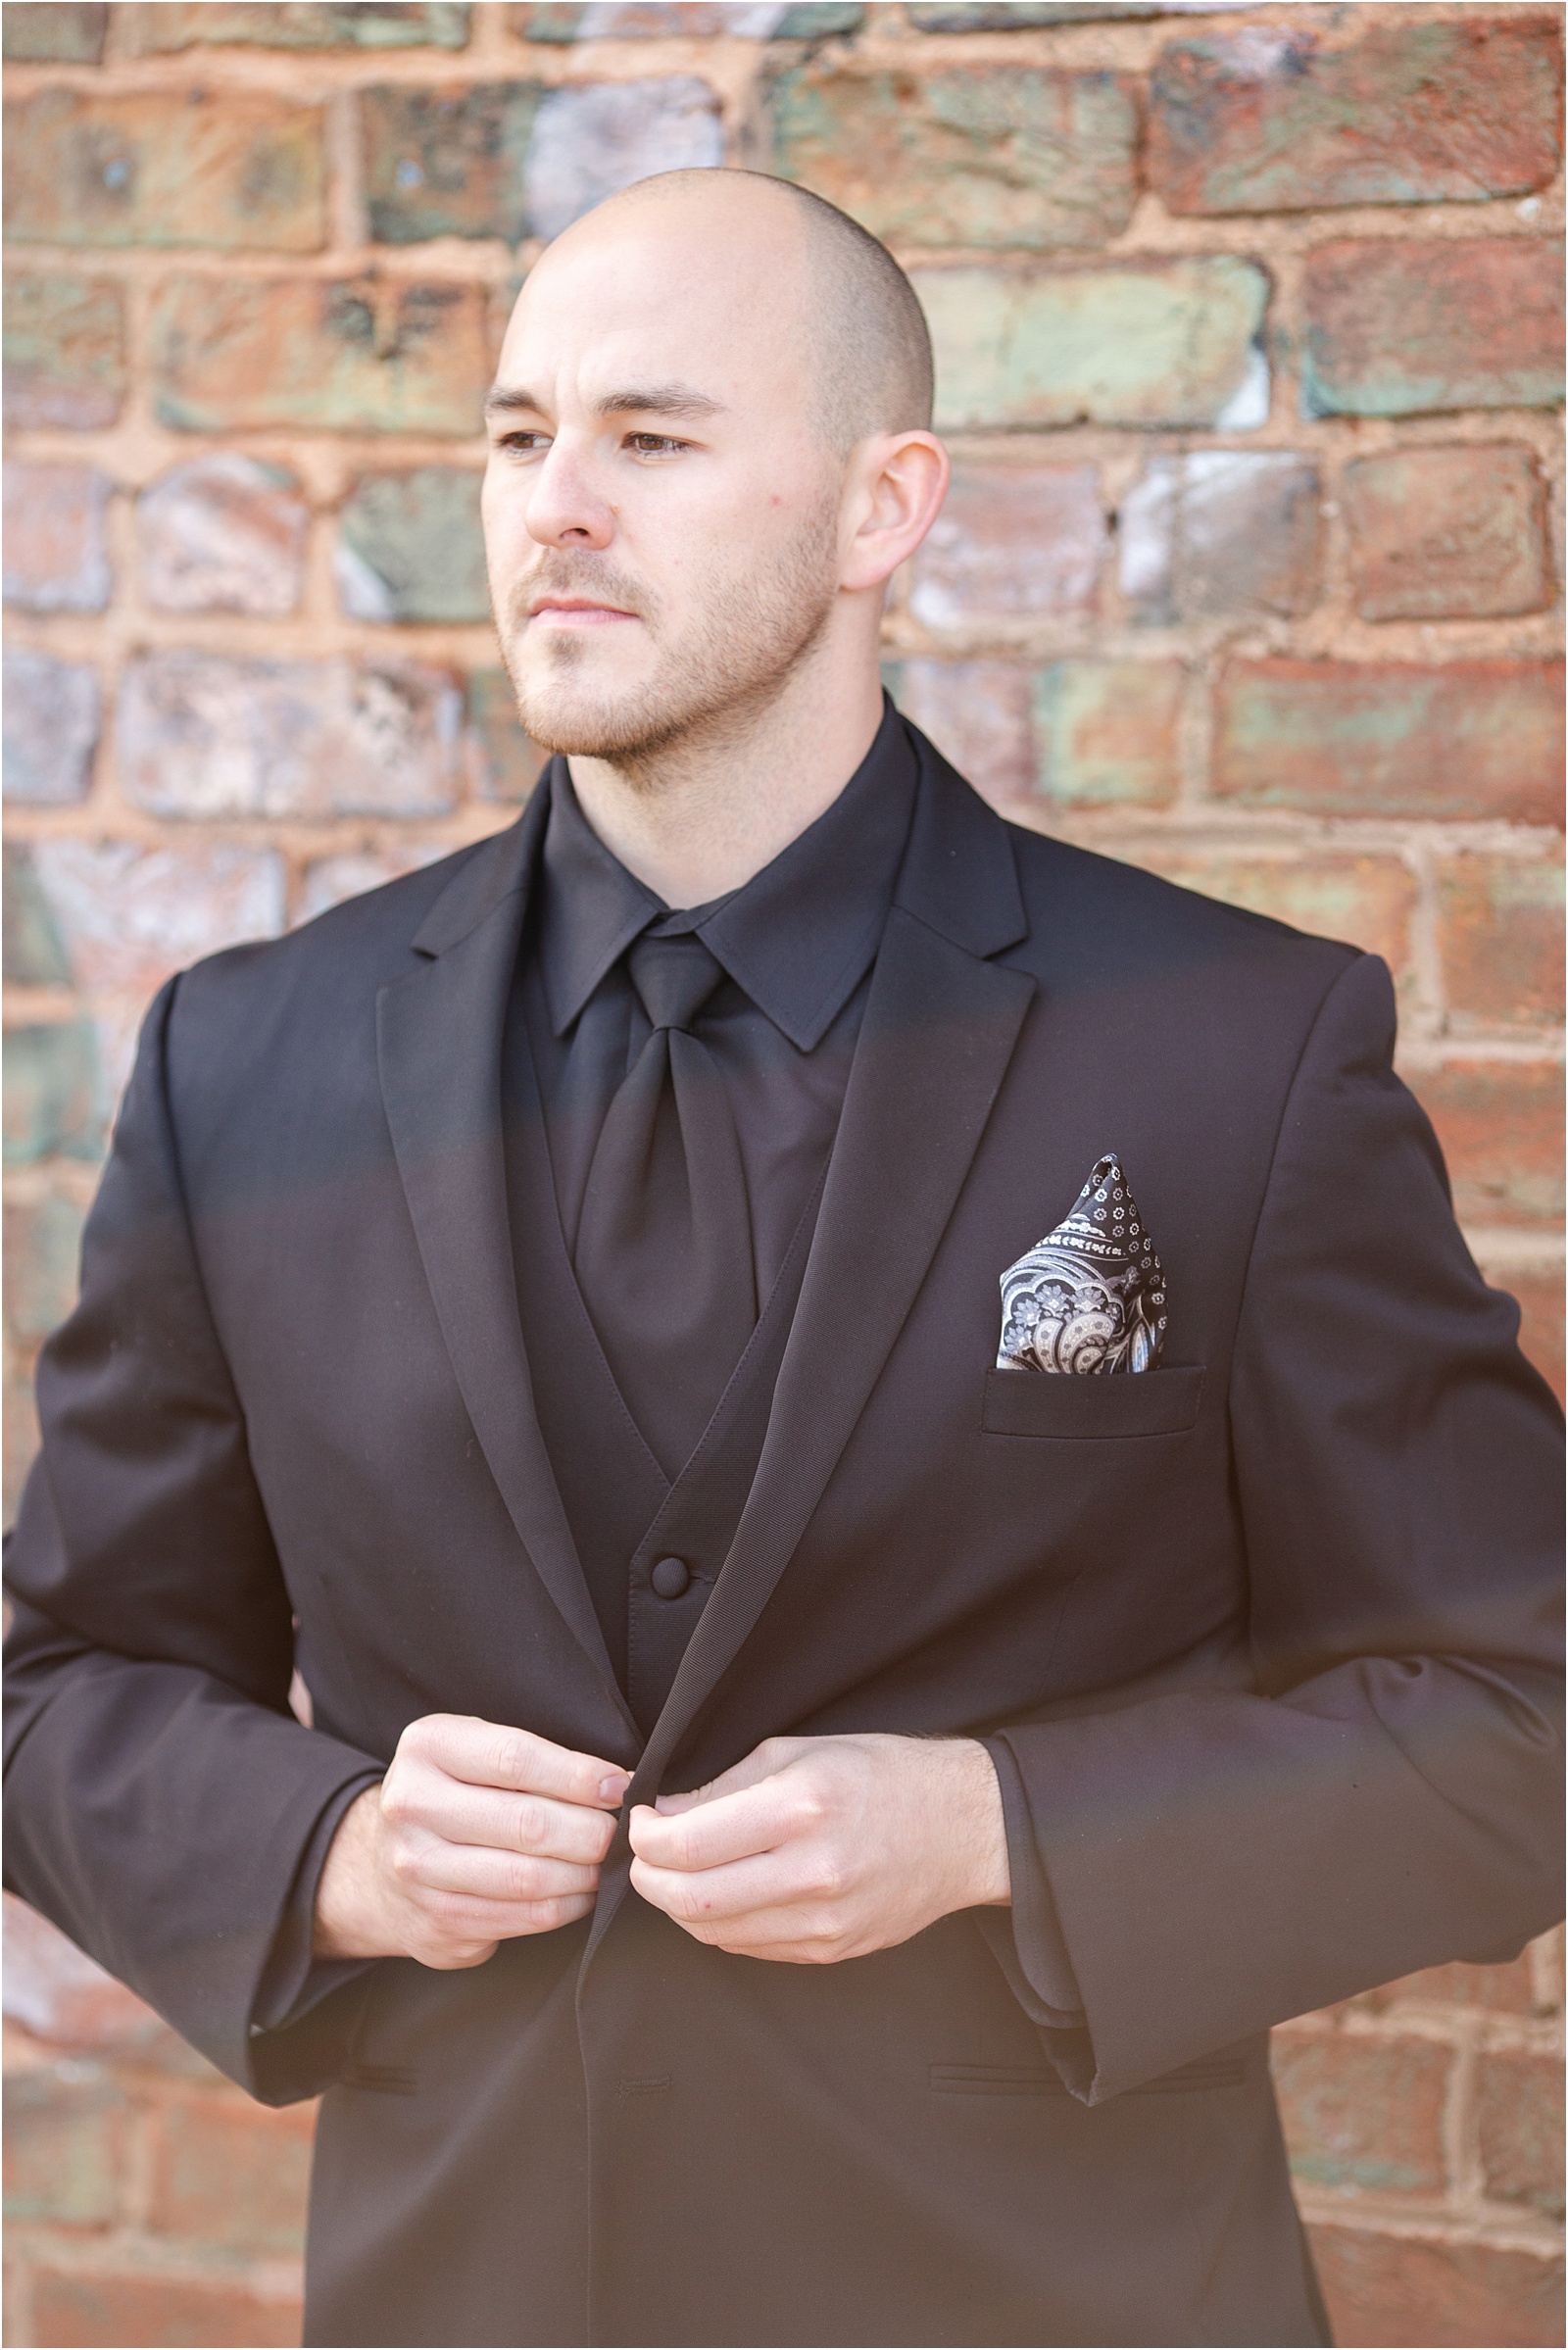 Groom looks off in distance as he buttons top button of jacket